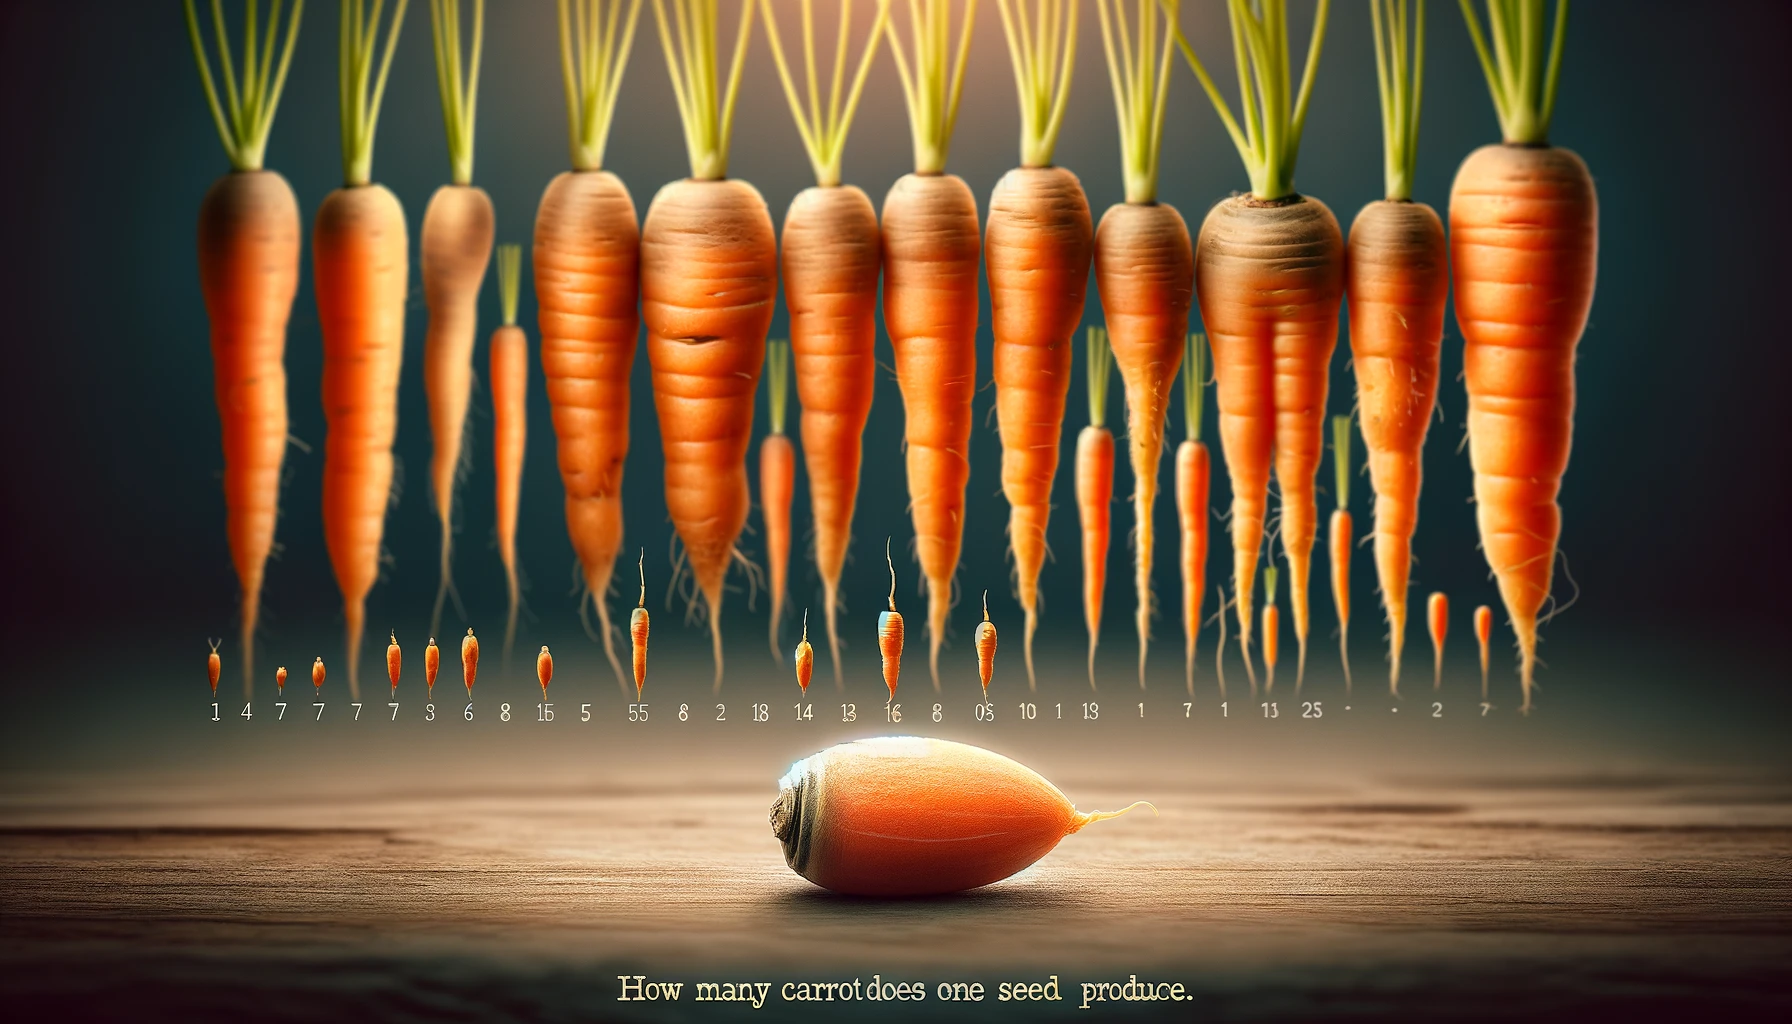 How Many Carrots Does One Seed Produce